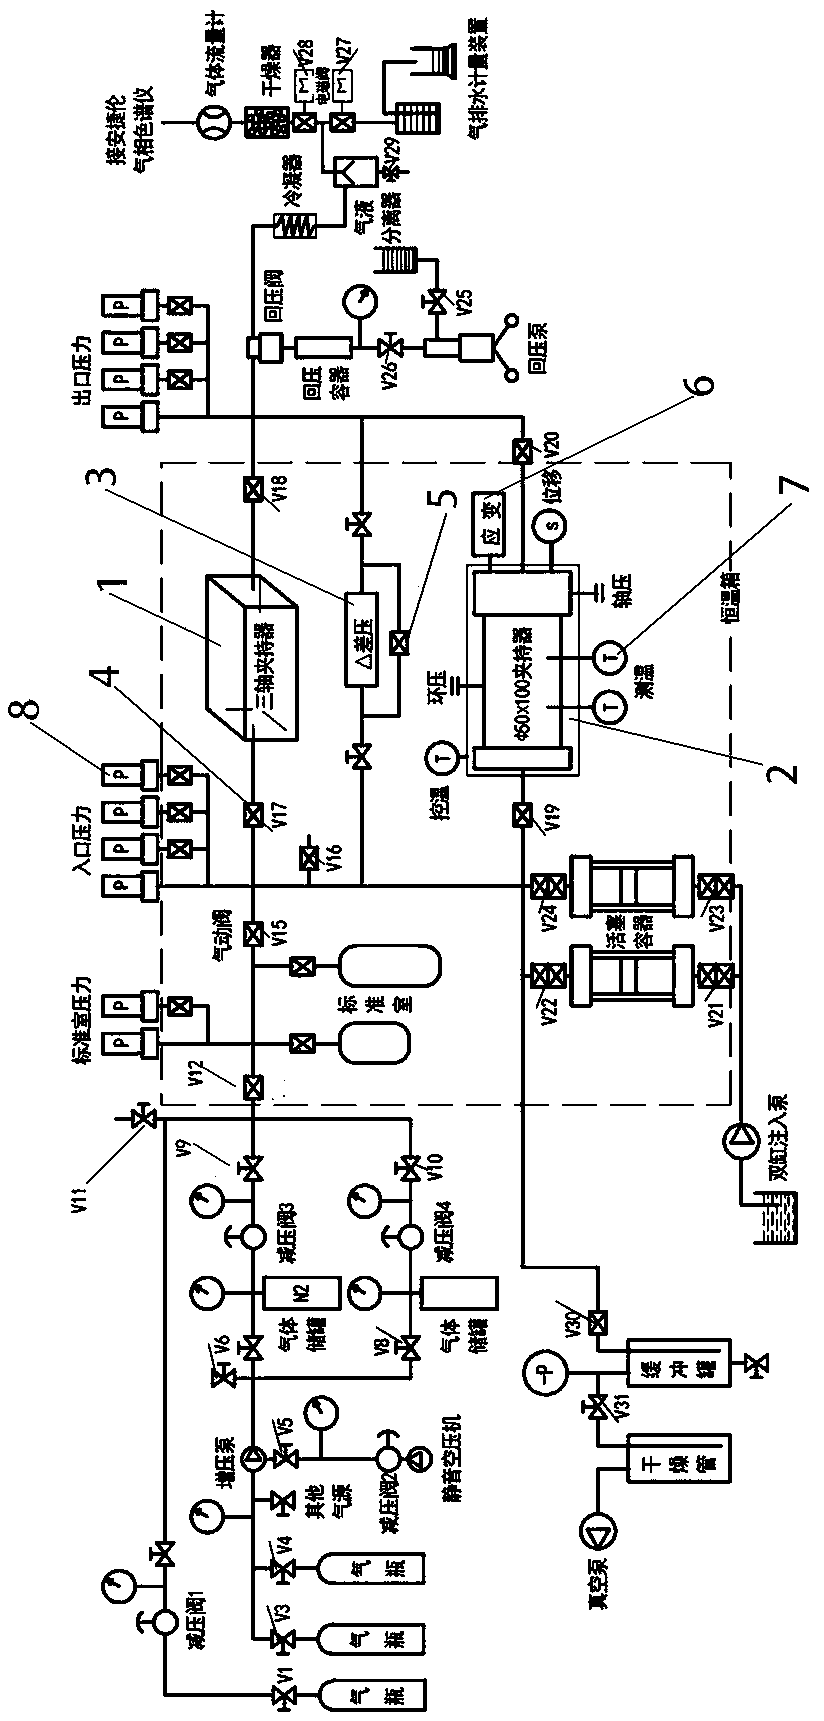 Rock and gas multi-process coupling test device for unconventional natural gas